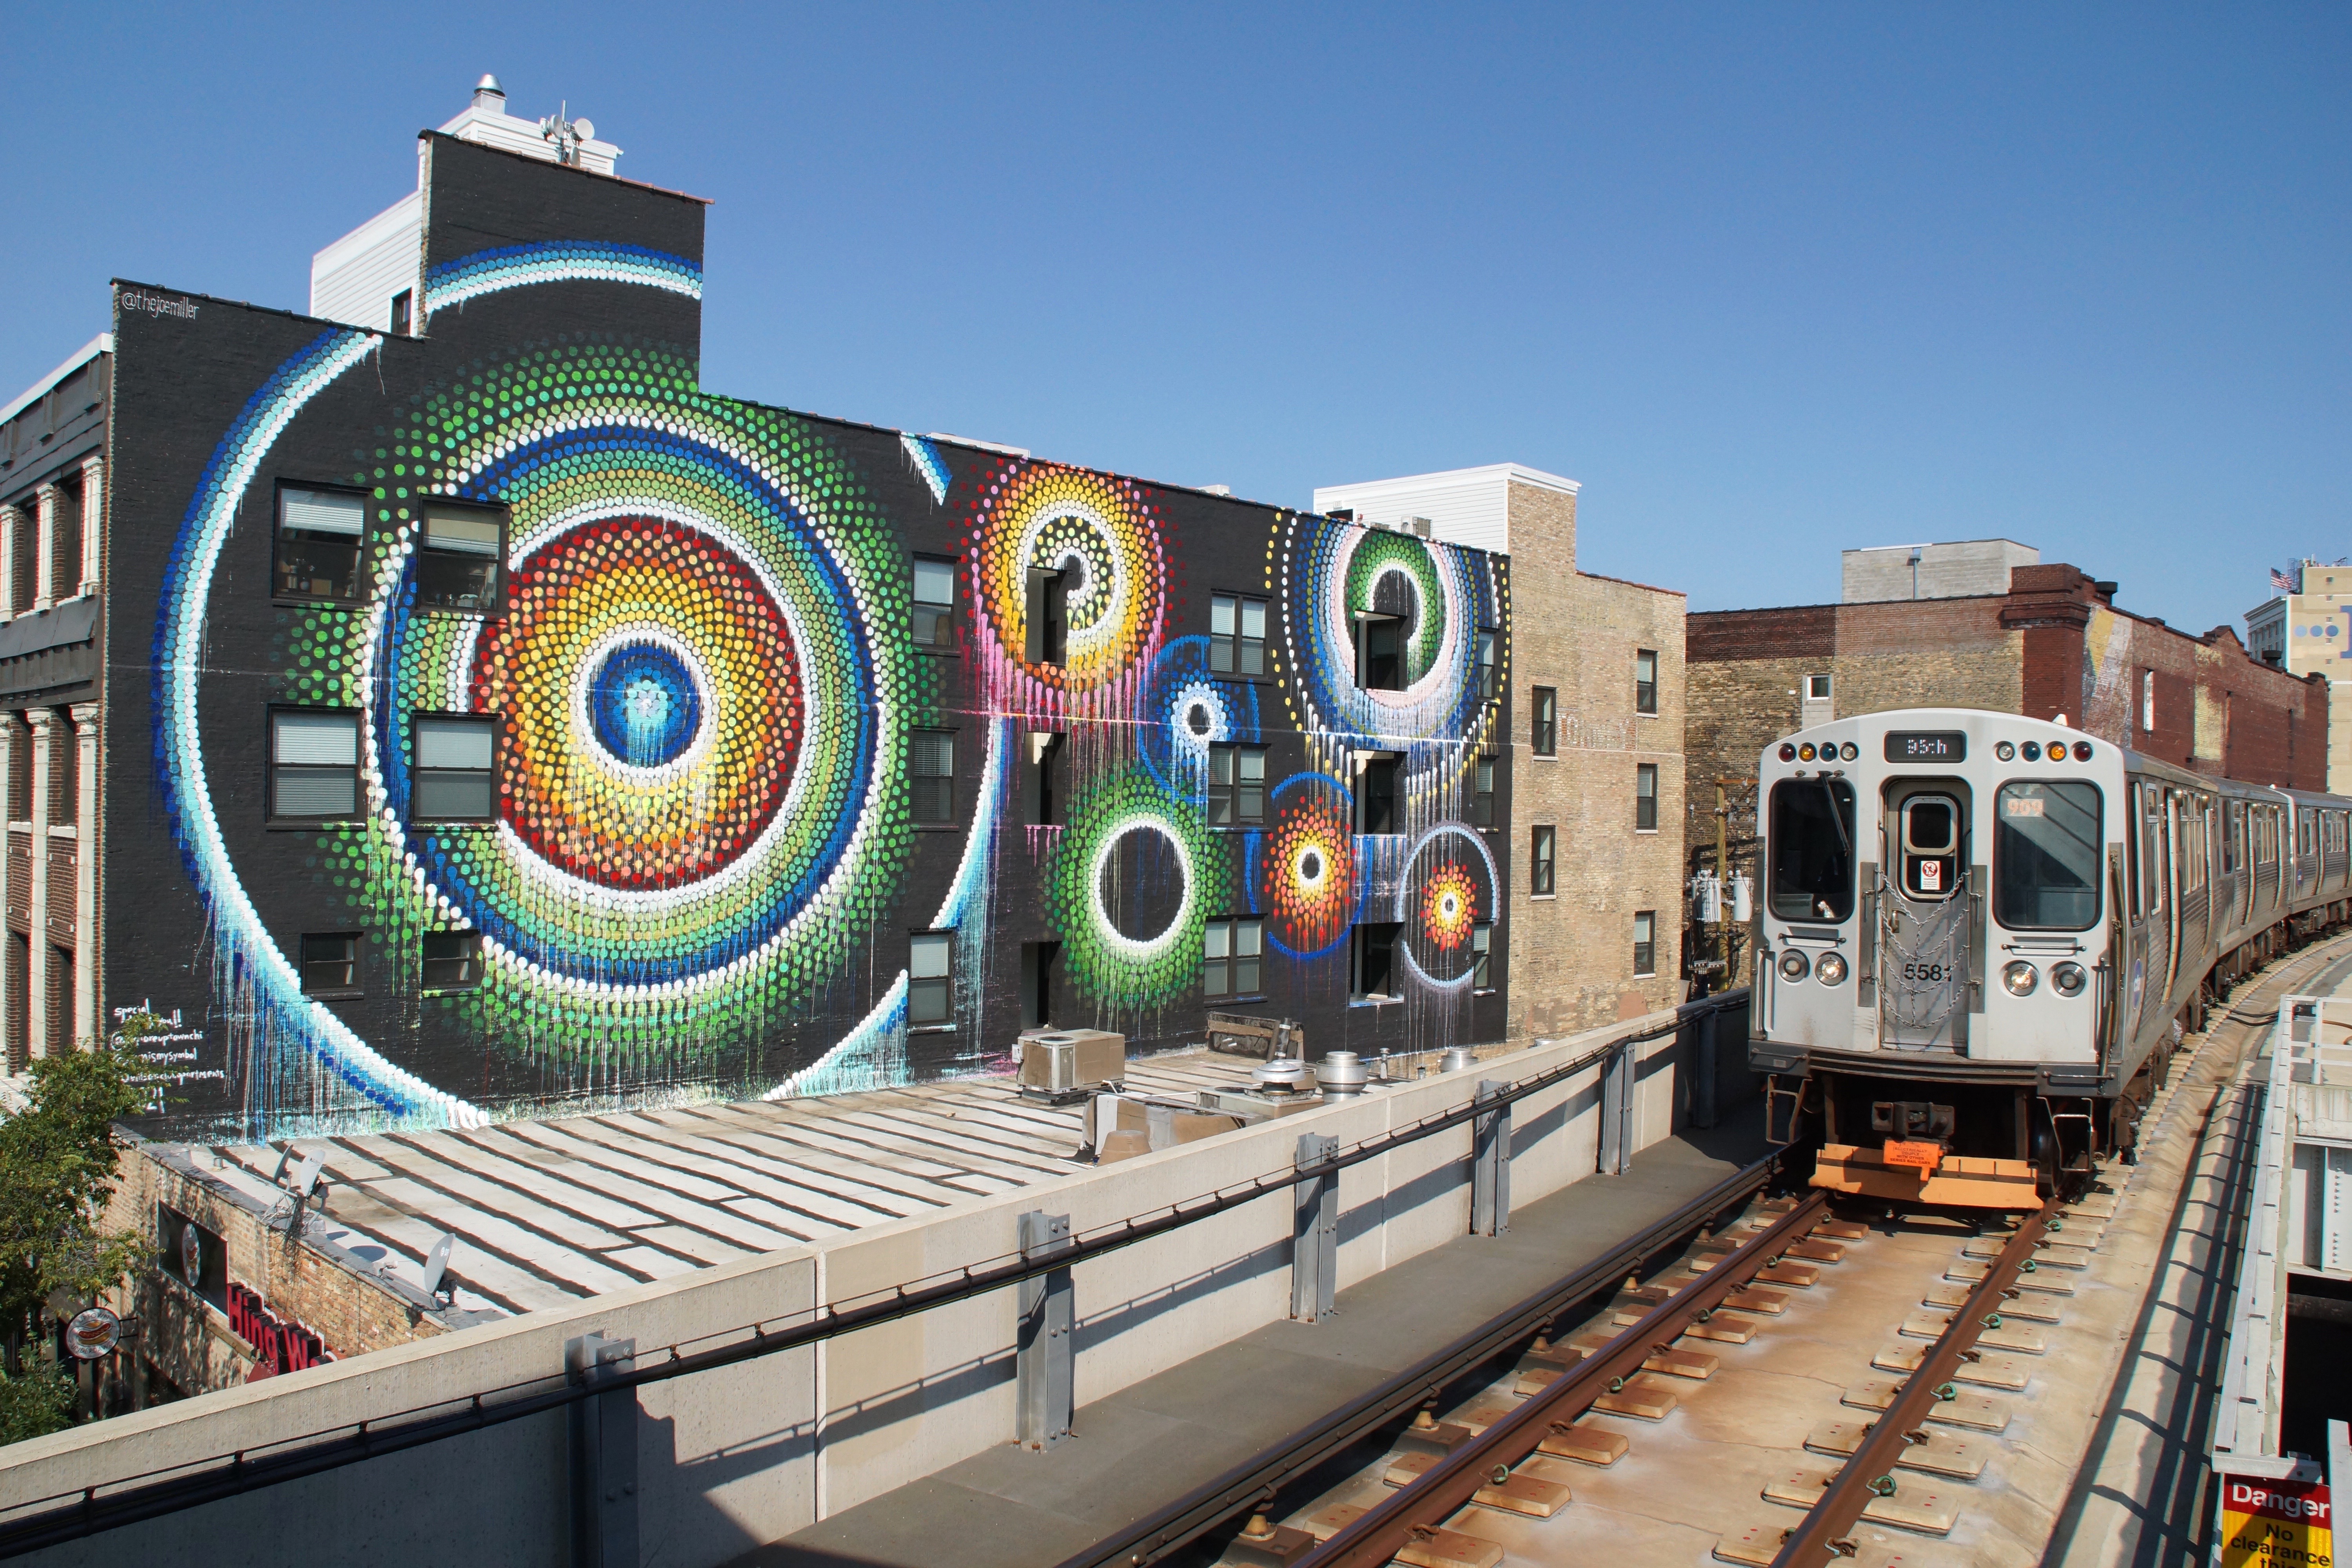 A southbound Red Line L train passes Joe Miller’s “Uptown Dot King” mural at 1124 W. Wilson St. in Uptown. The Lincoln Square artist always wanted to do a large-scale mural that could be seen from a train platform.